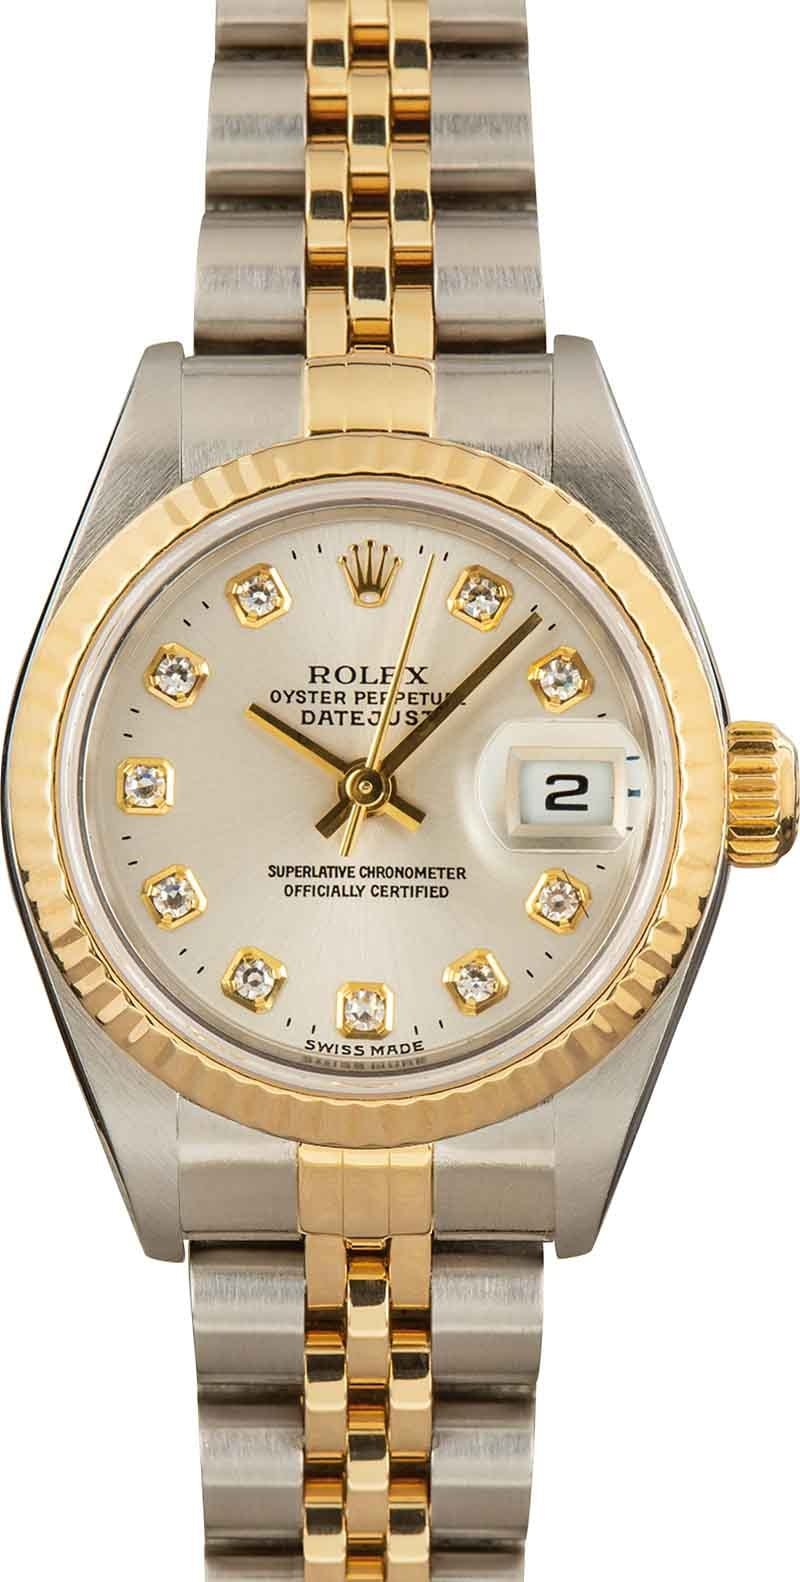 Rolex's Certified Pre-Owned Program Hits the U.S. Here's What to